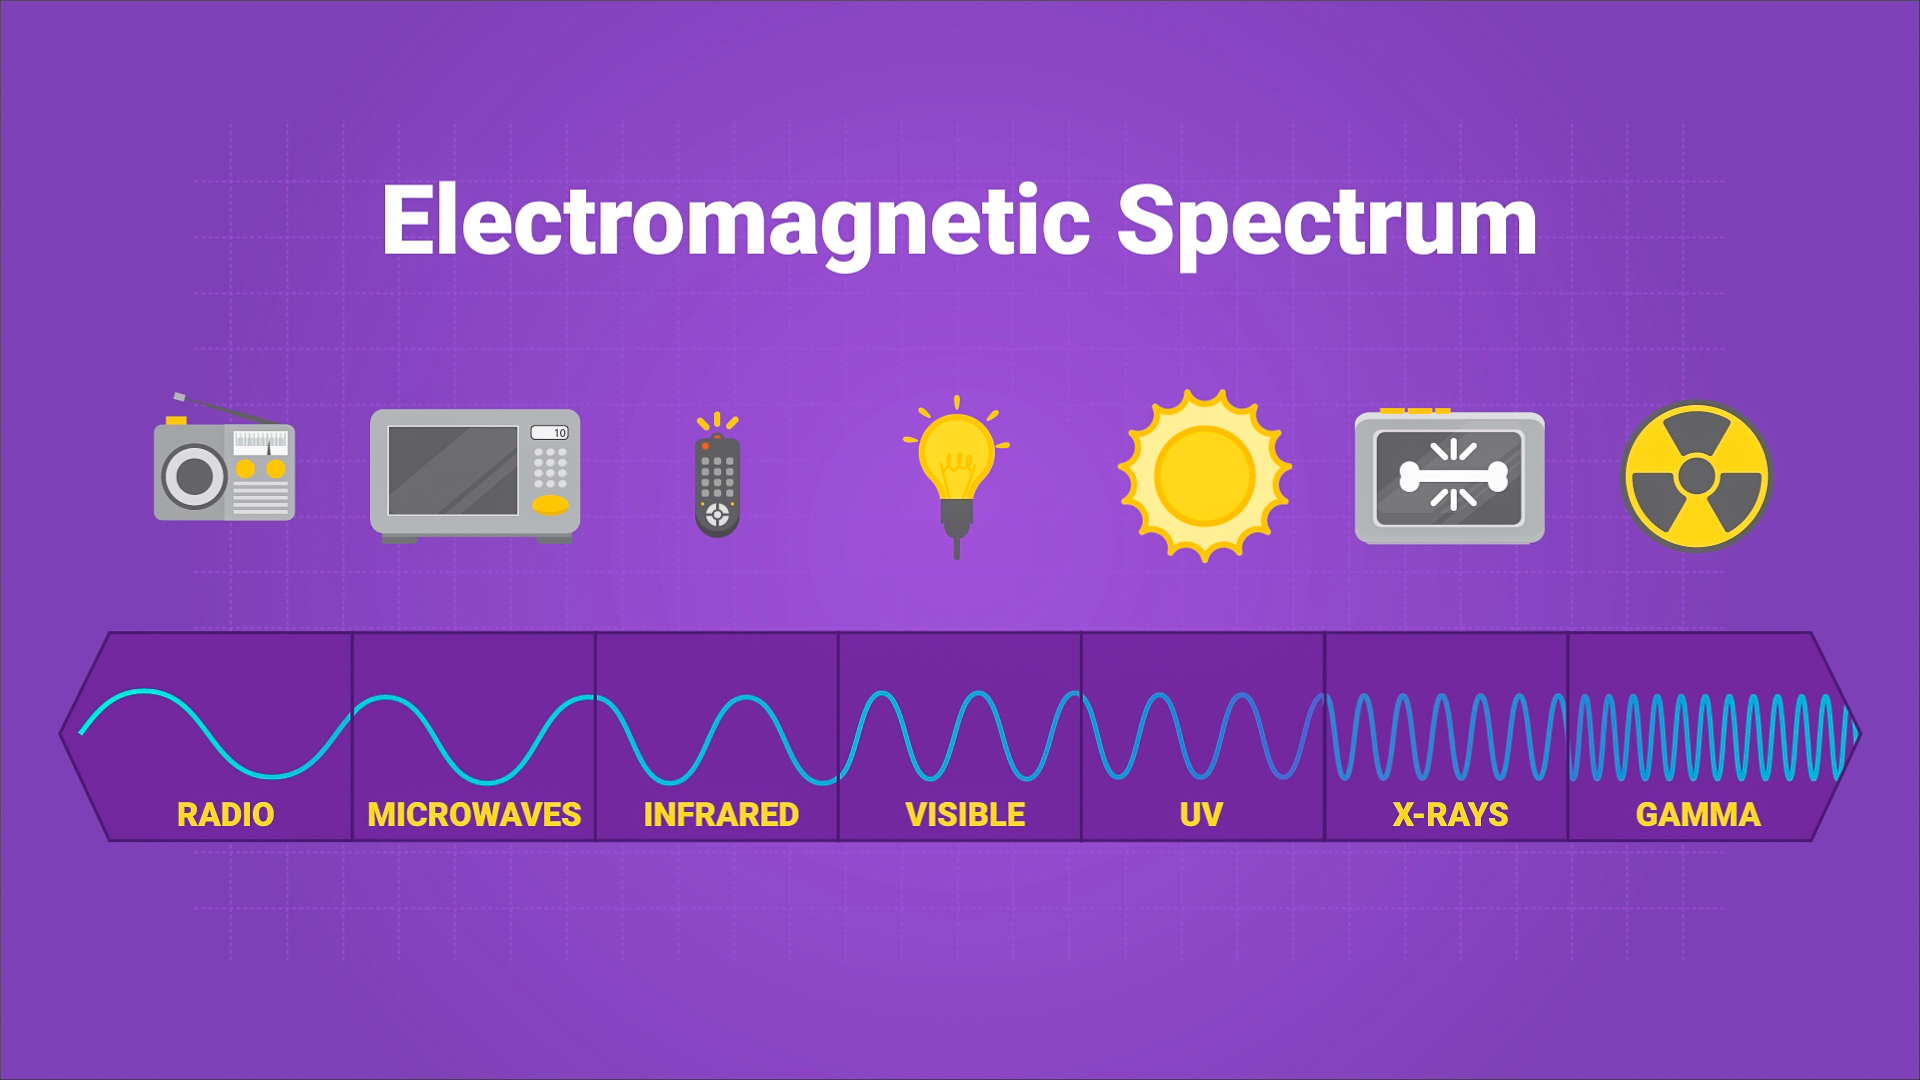 Read About The Electromagnetic Spectrum | Science for Grades 6-8